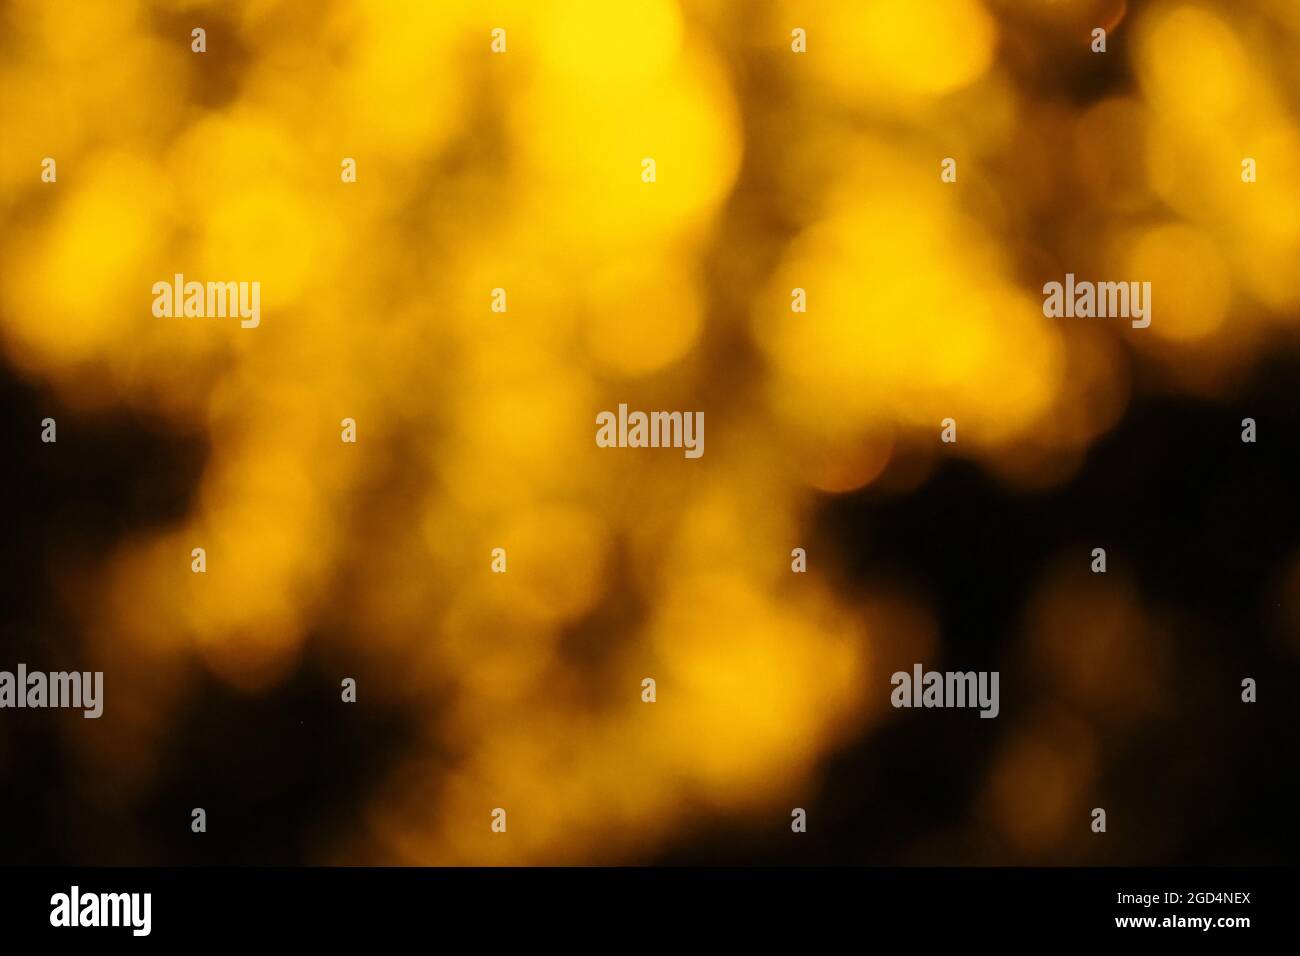 A background created by blurring yellow colored lights Stock Photo